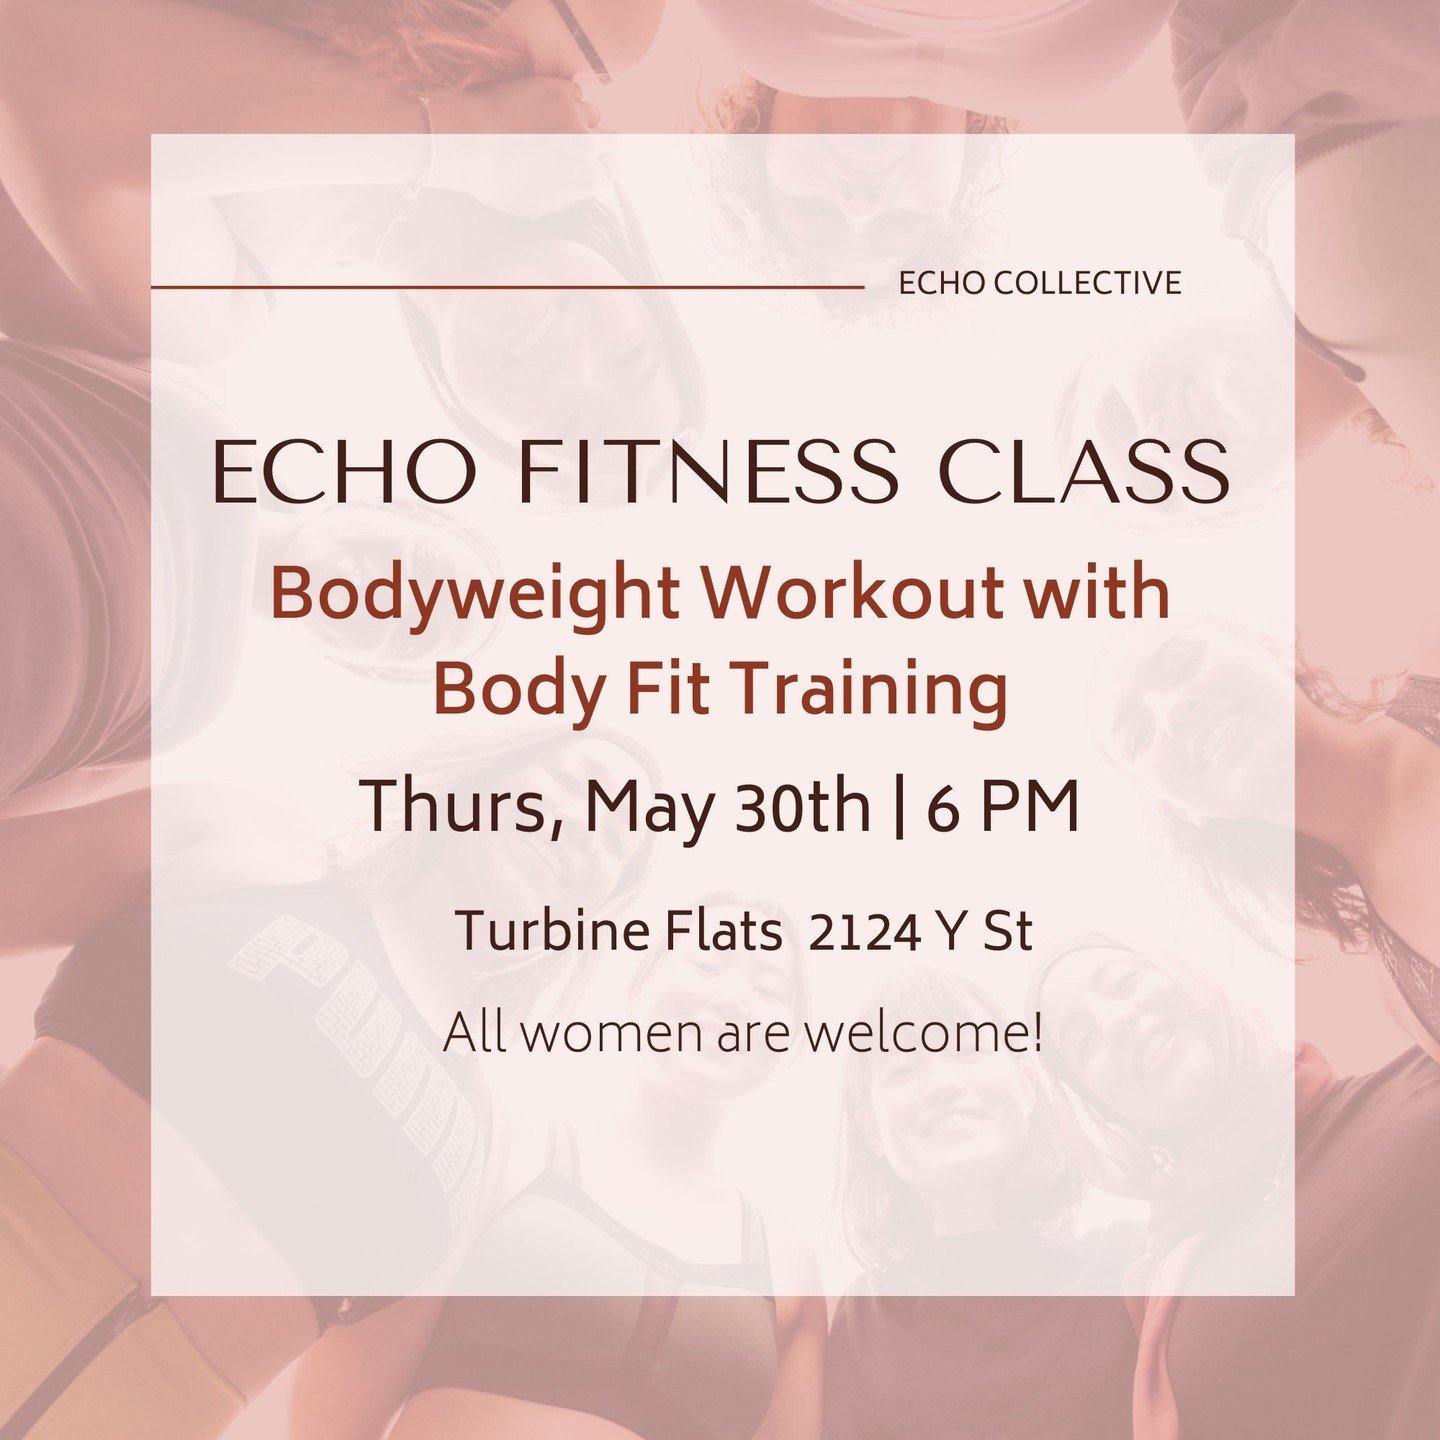 Join us for a free bodyweight class with Jeralee Hahn! This class is a safe and fun place for women to exercise in community. ⁠
⁠
The class is held in the front gallery room. No registration is required. Please enter through the doors along Y Street.